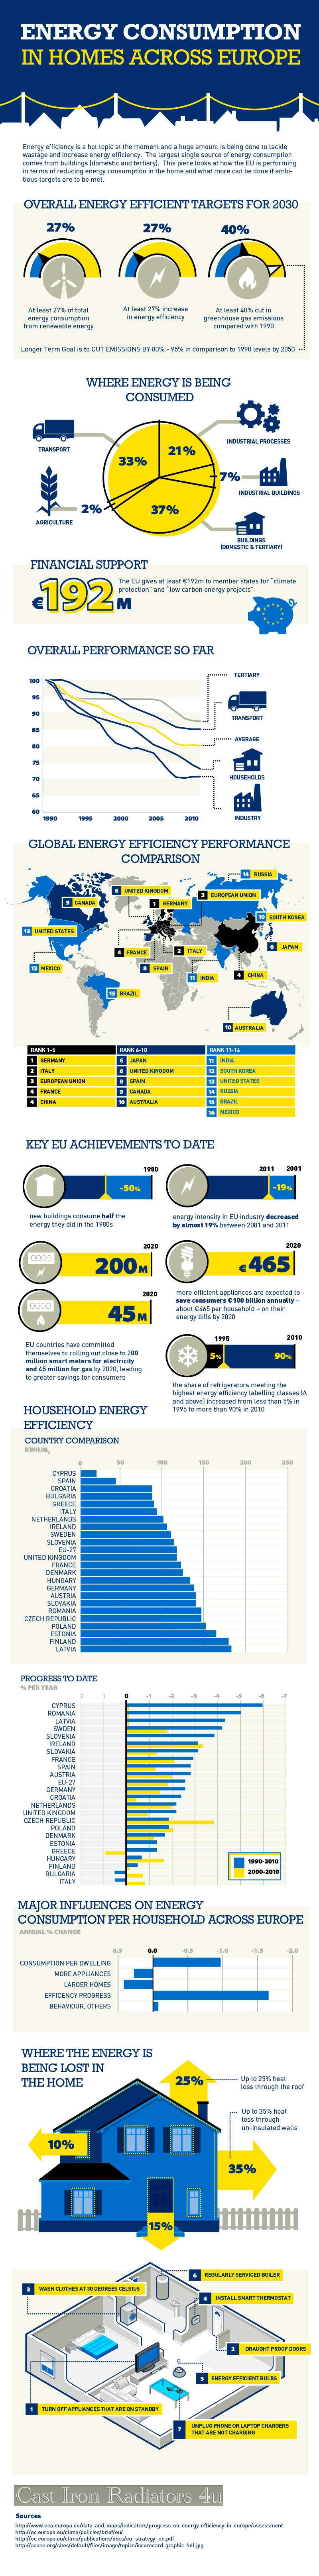 How Energy Efficient Are European Homes